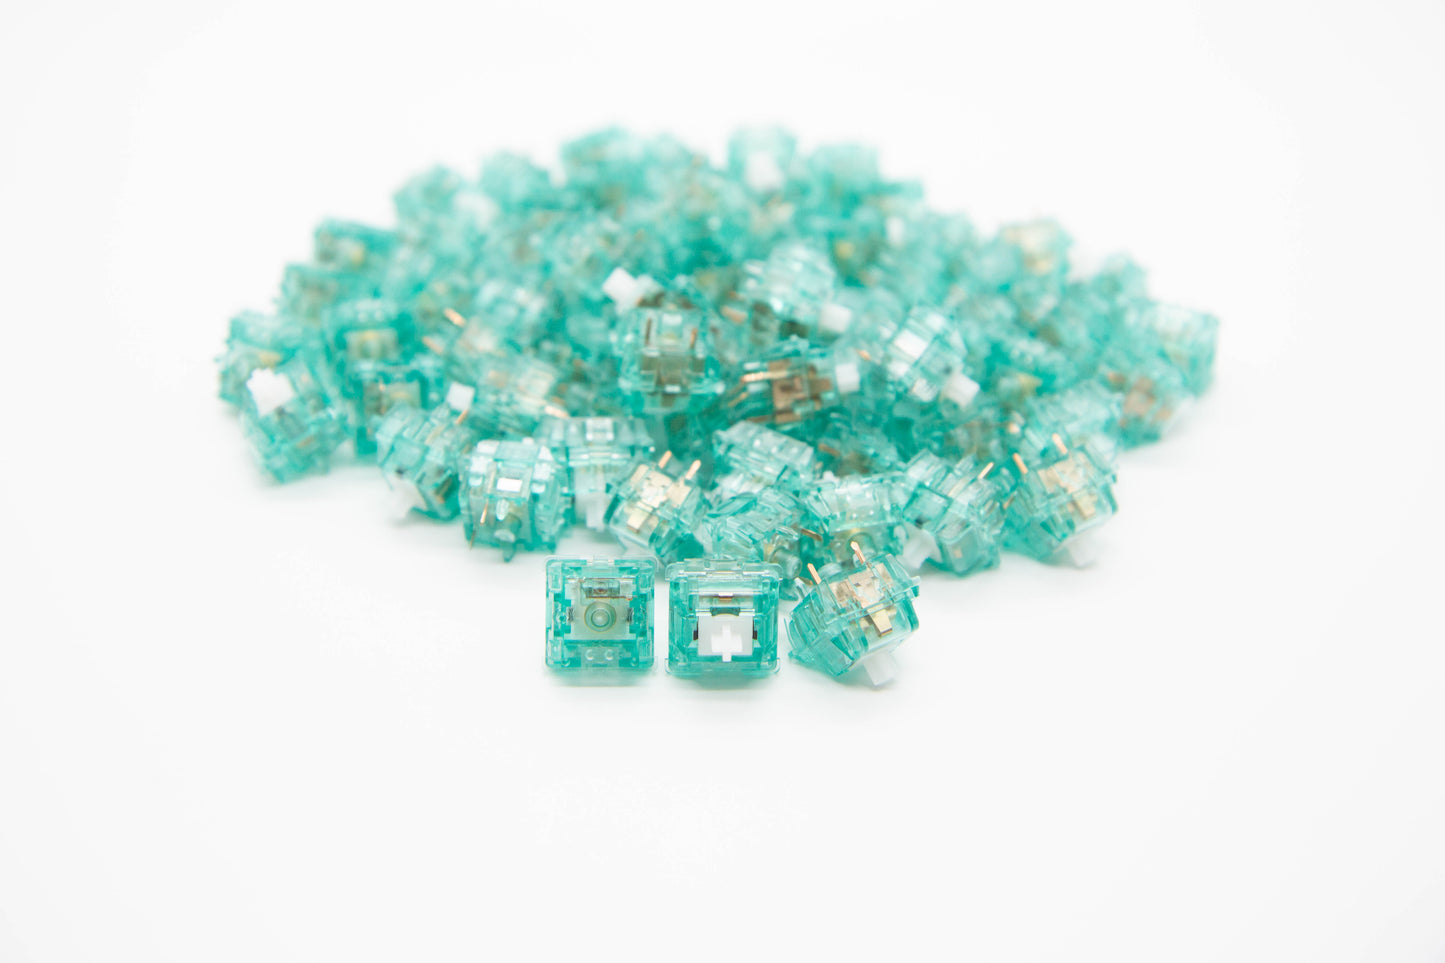 Close-up shot of a pile of Silent T1 mechanical keyboard switches featuring teal transparent housing and clear, white stems